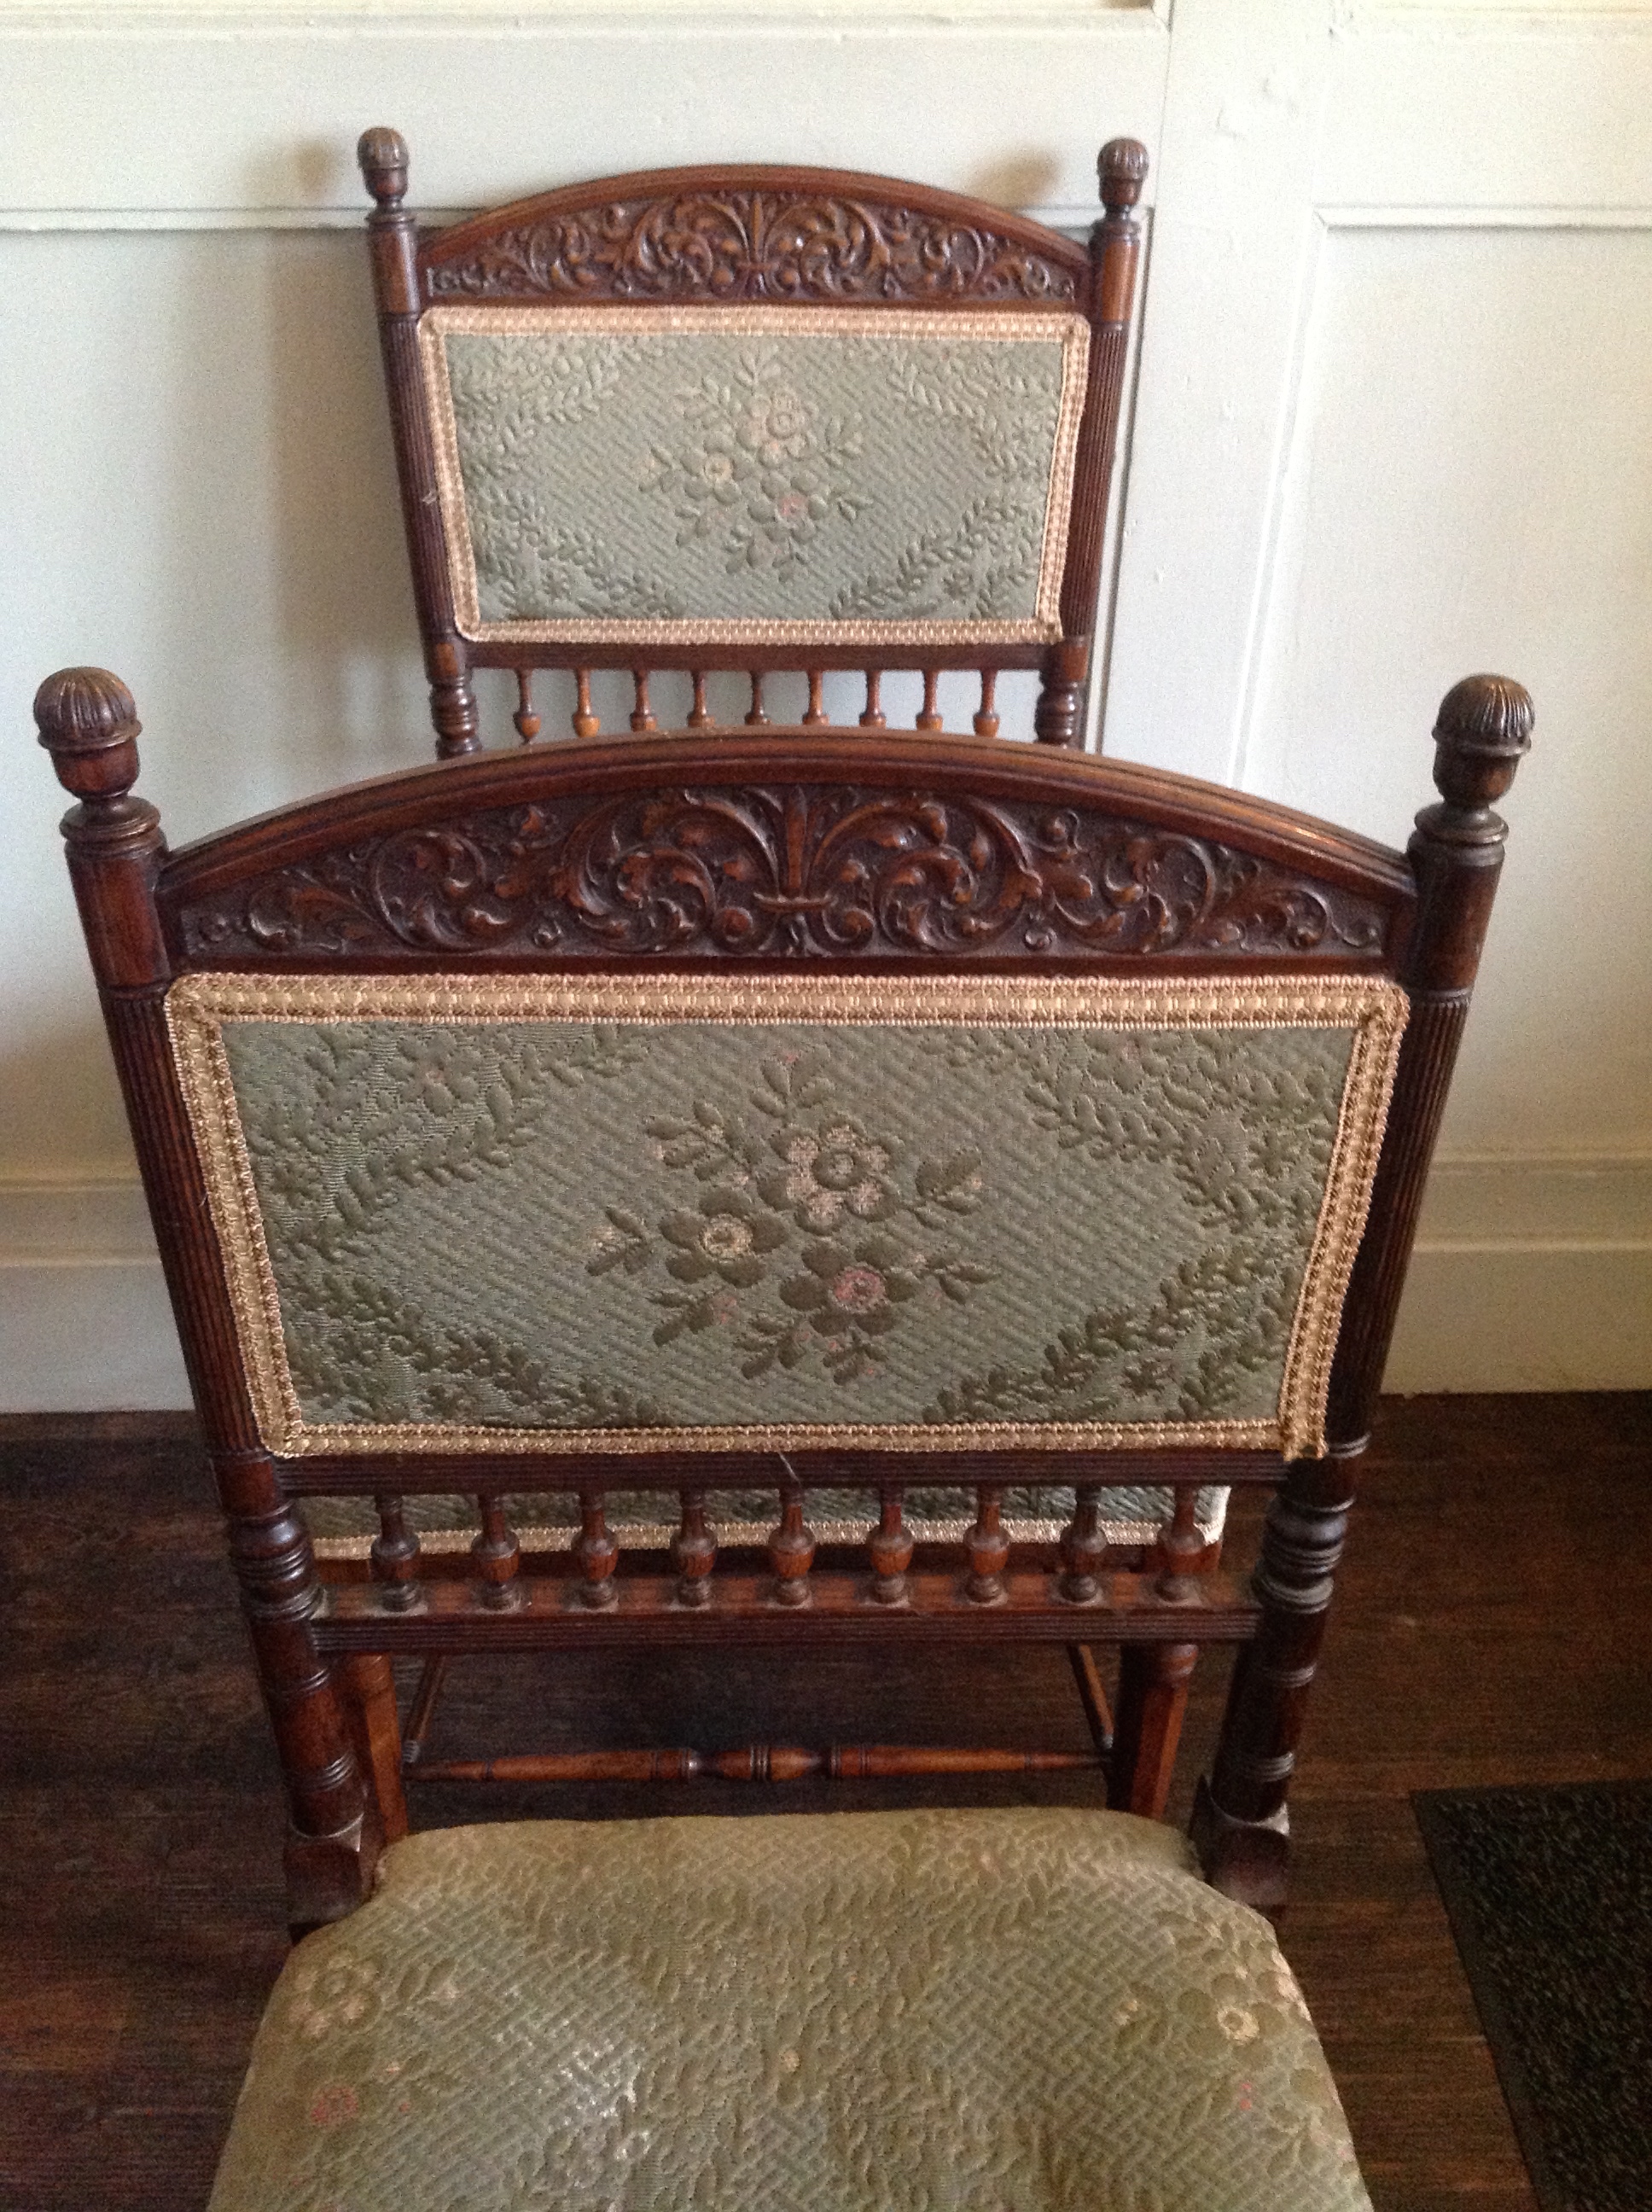 Pair fine quality Edwardian salon chairs by Collinson & Lock St. Bride St. London. Designed by